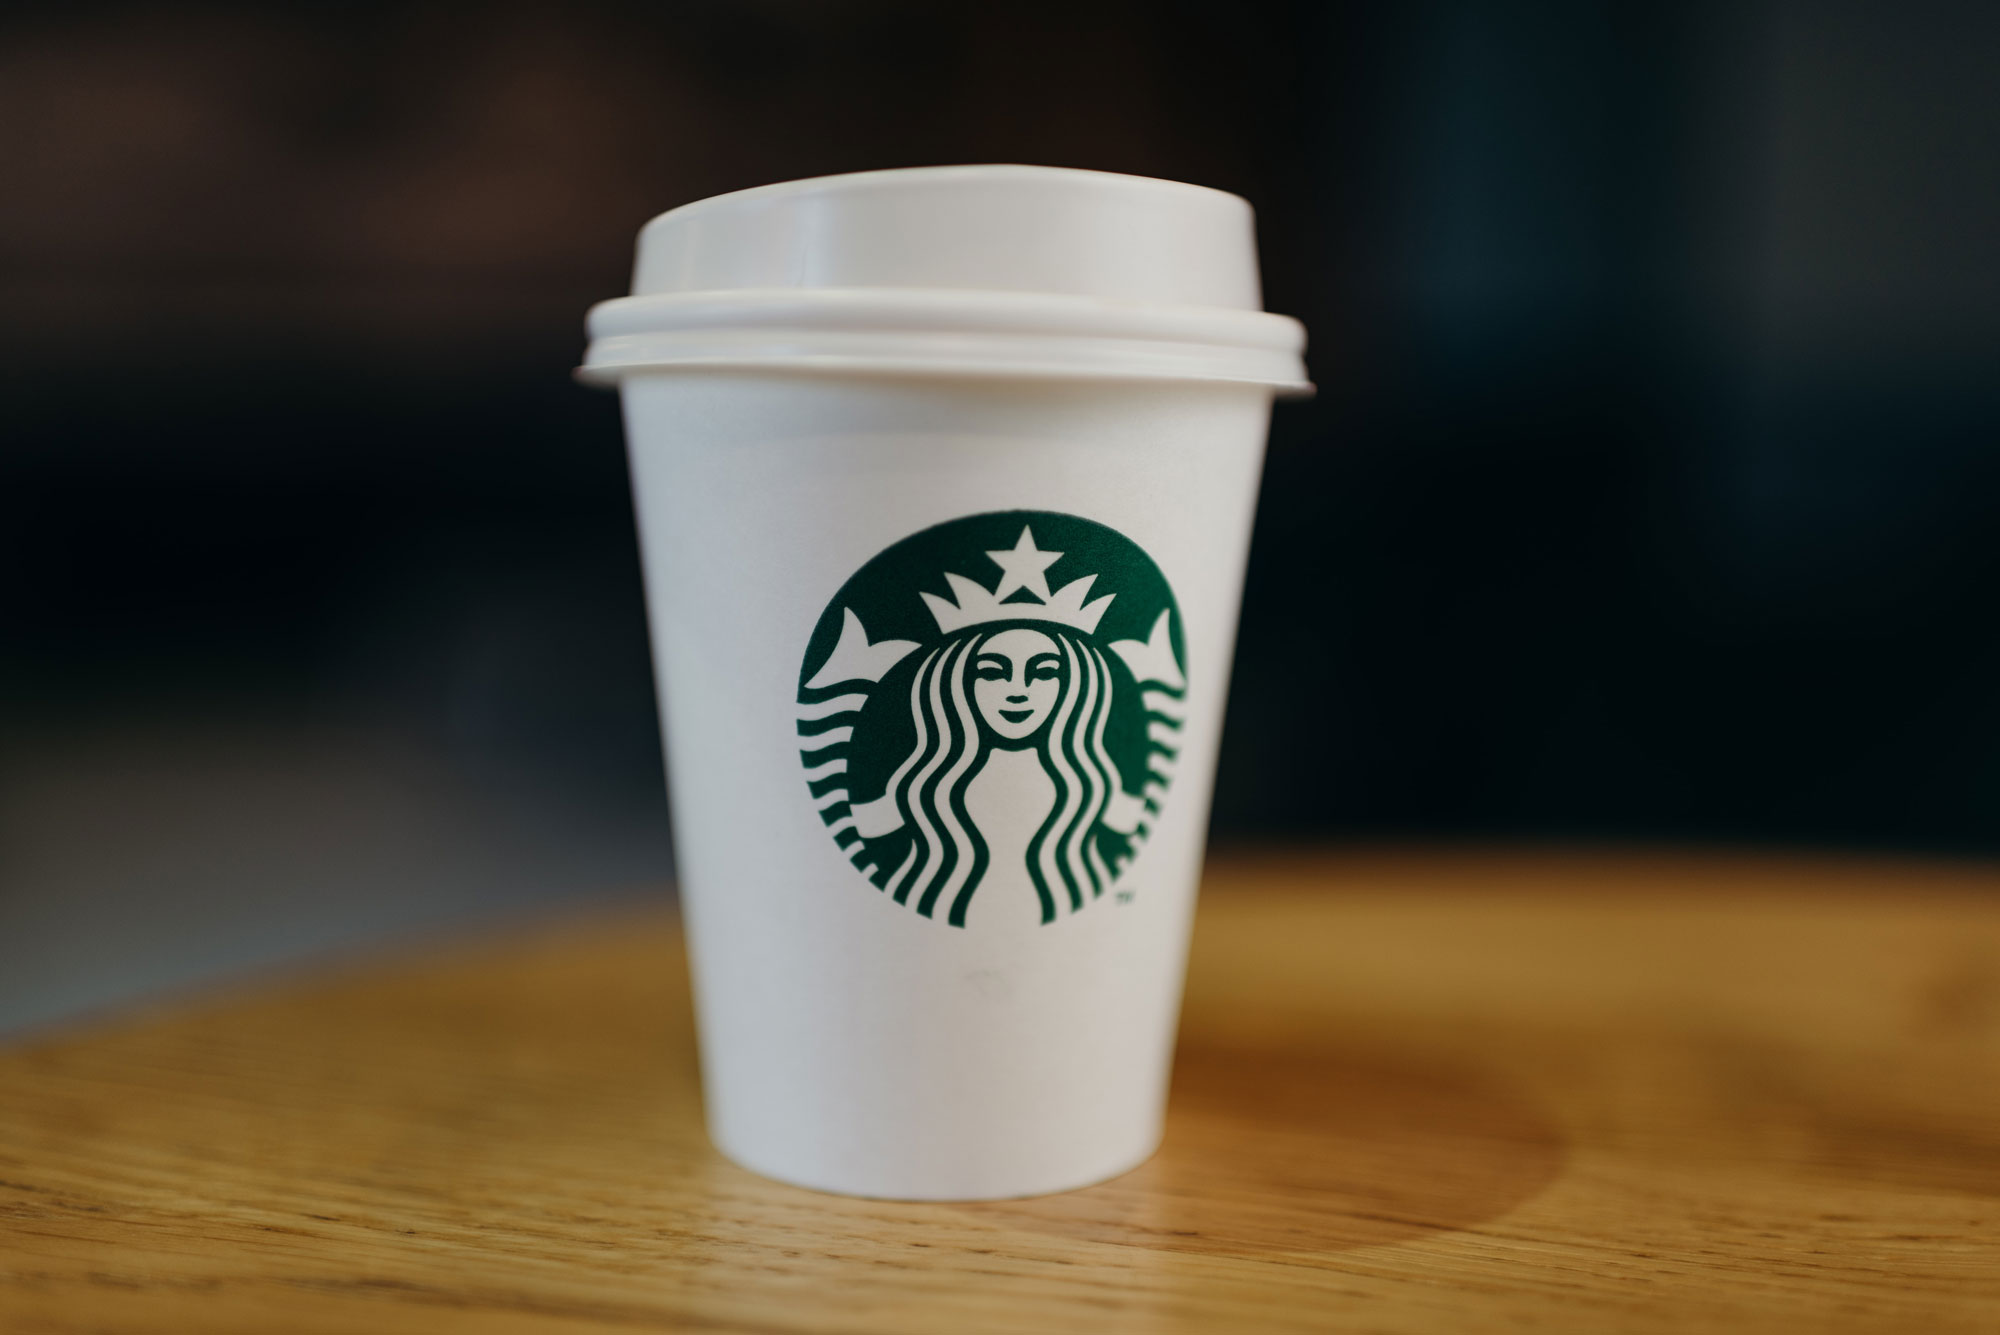 An extremely shallow focus close-up of a takeaway coffee cup with the Starbucks logo printed on the front.